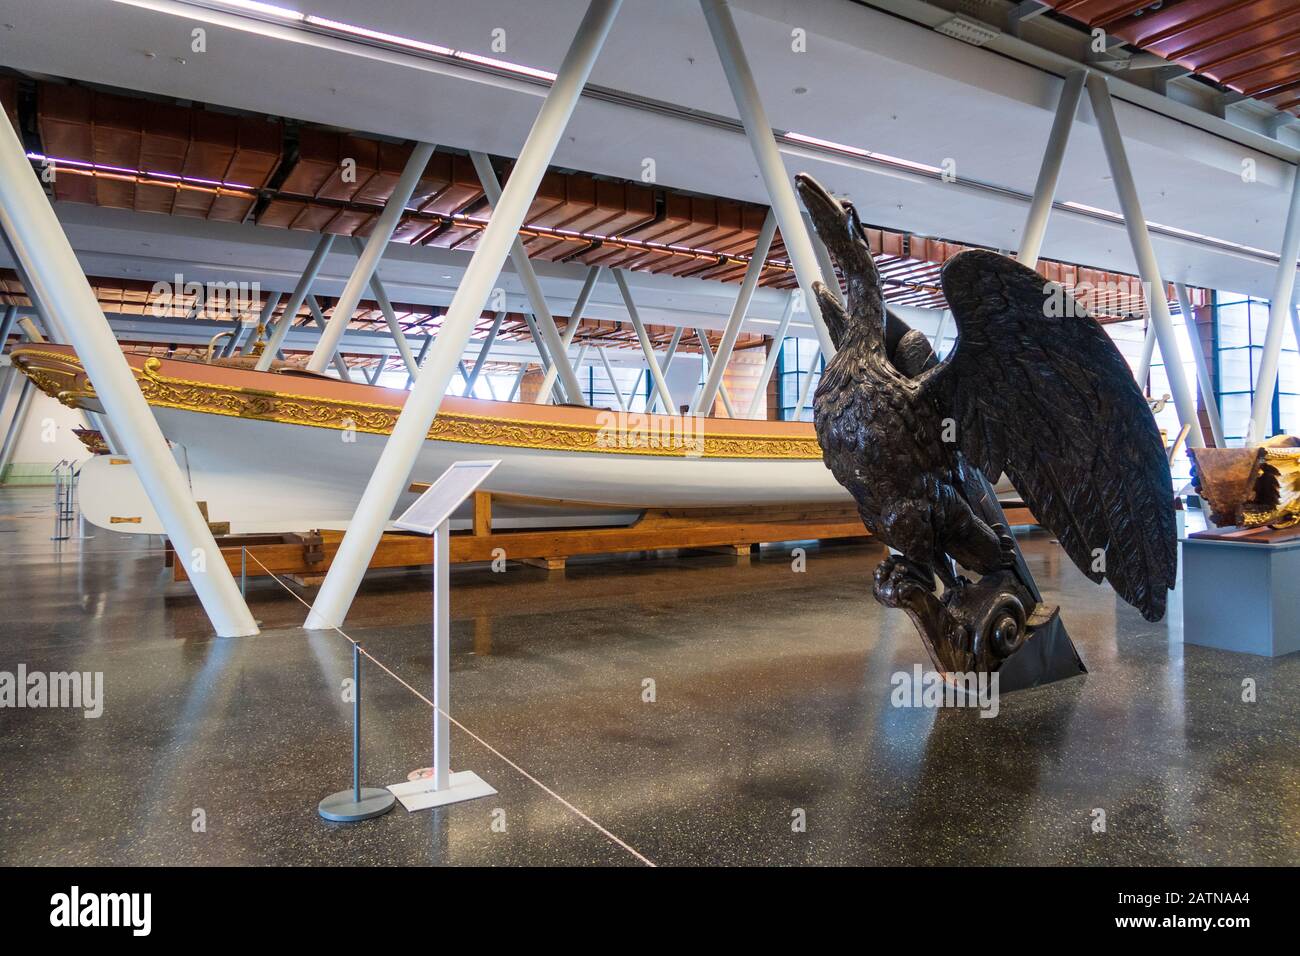 Istanbul, Turkey - Jan 12, 2020: imperial caiques, mostly from the 19th century, and ship figureheads  are displayed in The Istanbul Naval Museum, Tur Stock Photo